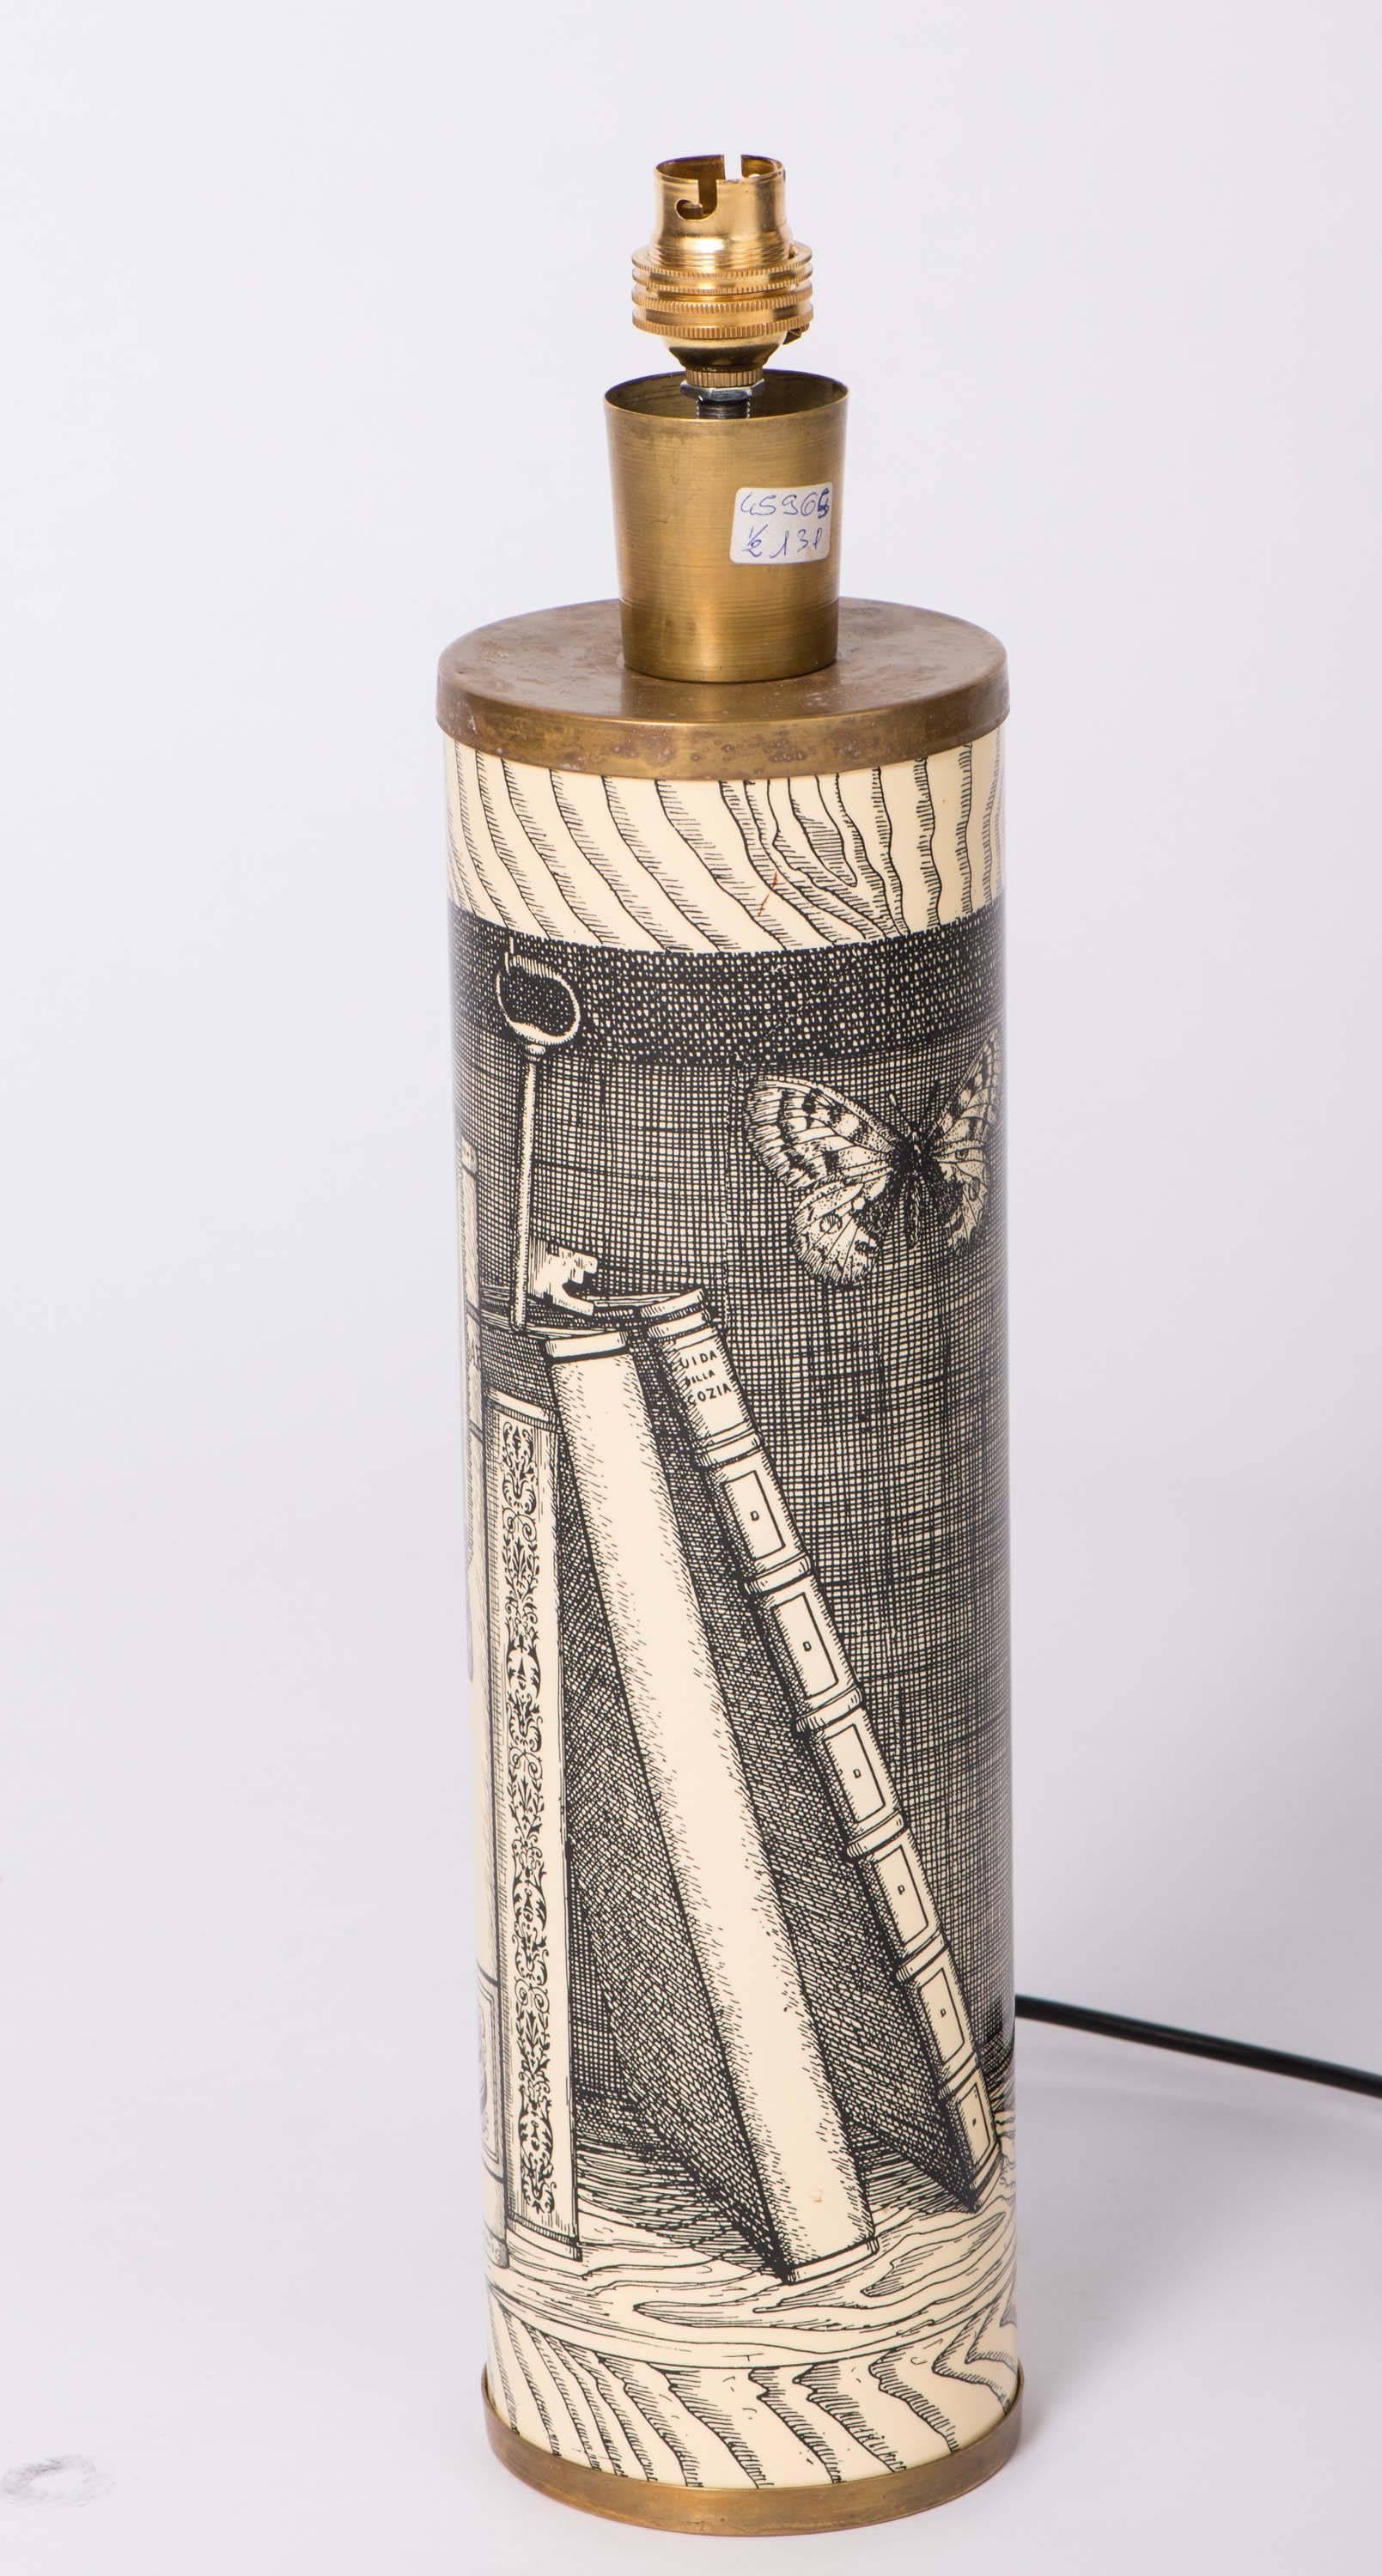 An early lamp by Piero Fornasetti.
“Libri.”
Metal work, lithographically printed.
Brass.
Italy,
circa 1960.
10 cm diameter.
        